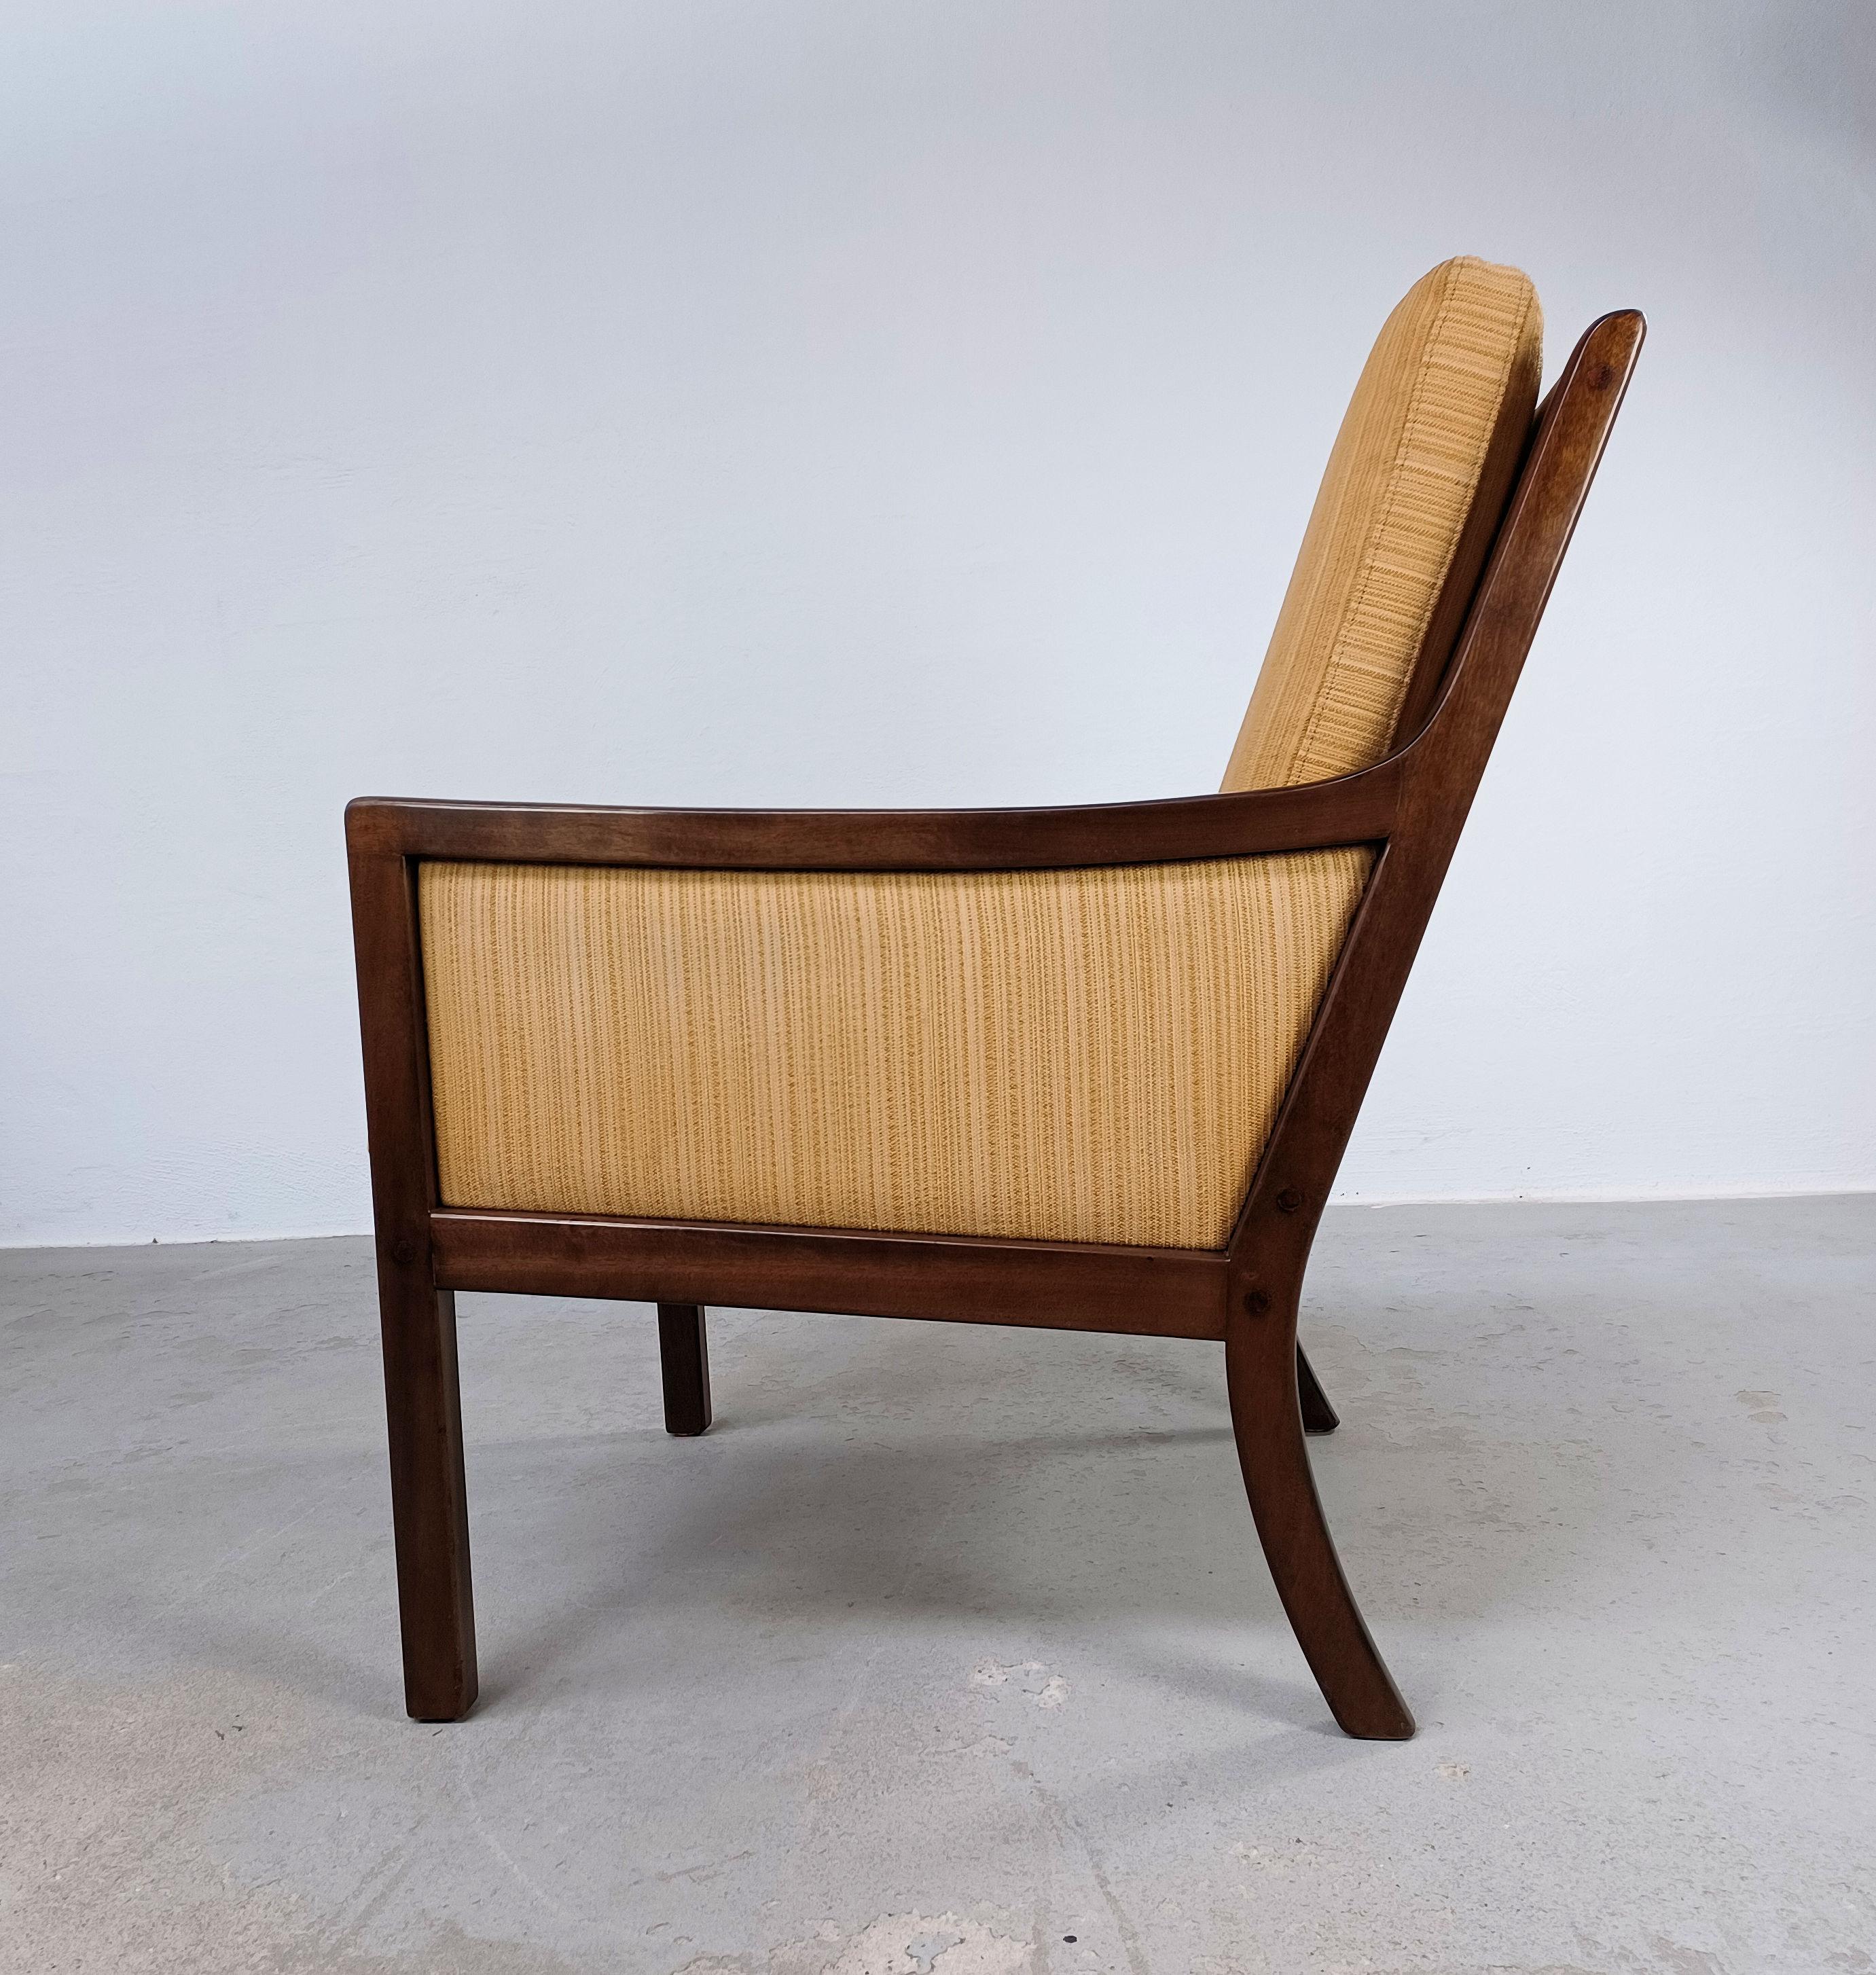 1960s Four Fully Restored Ole Wanscher Mahogny Lounge Chairs Custom Upholstery In Good Condition For Sale In Knebel, DK